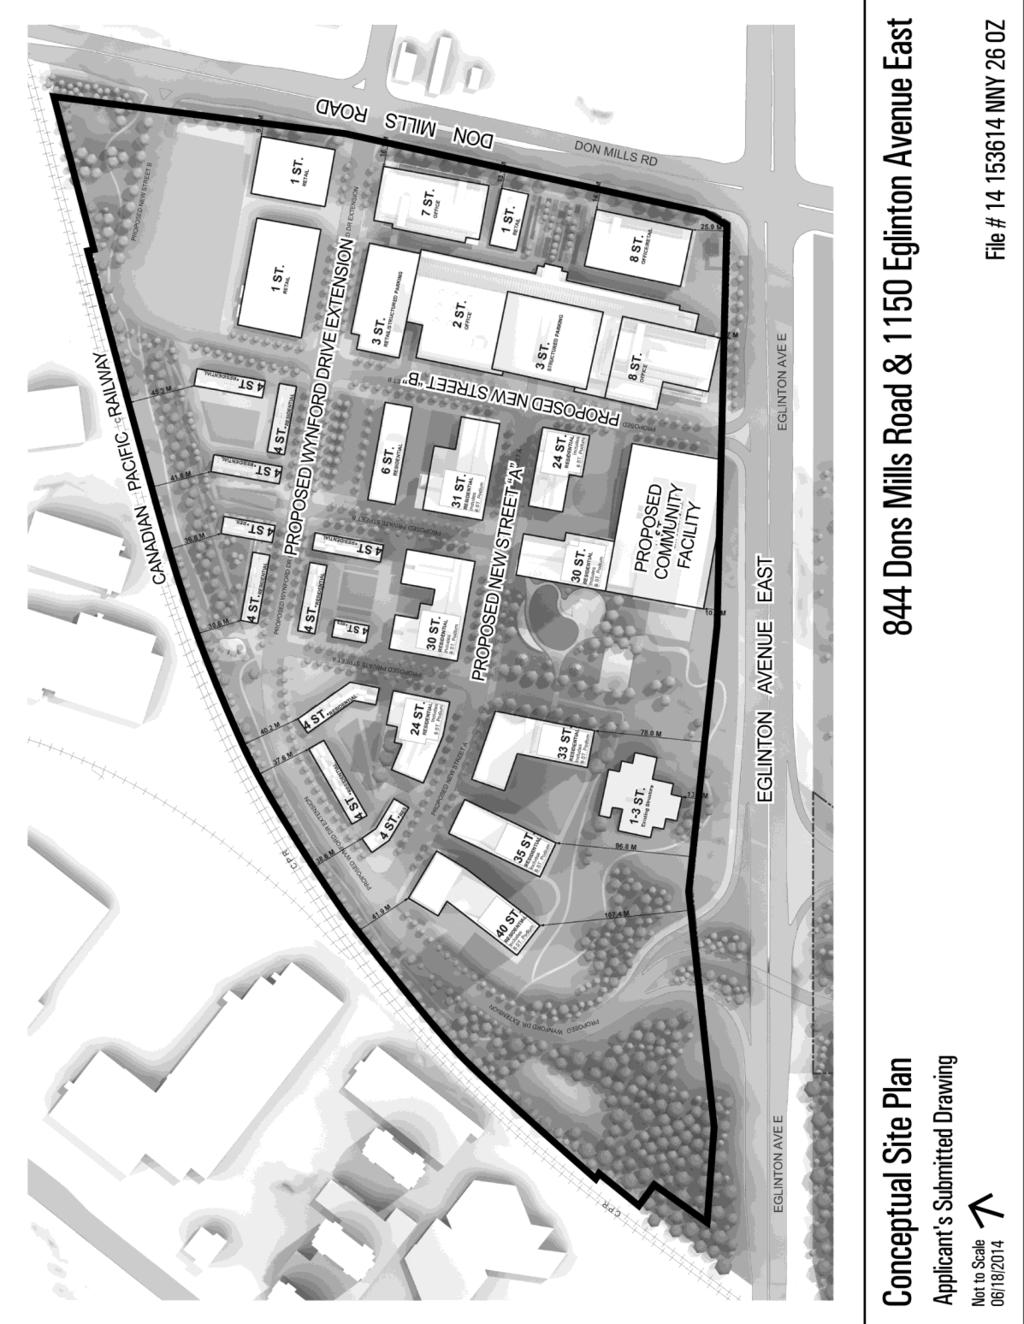 Attachment 1: Conceptual Site Plan Staff report for action